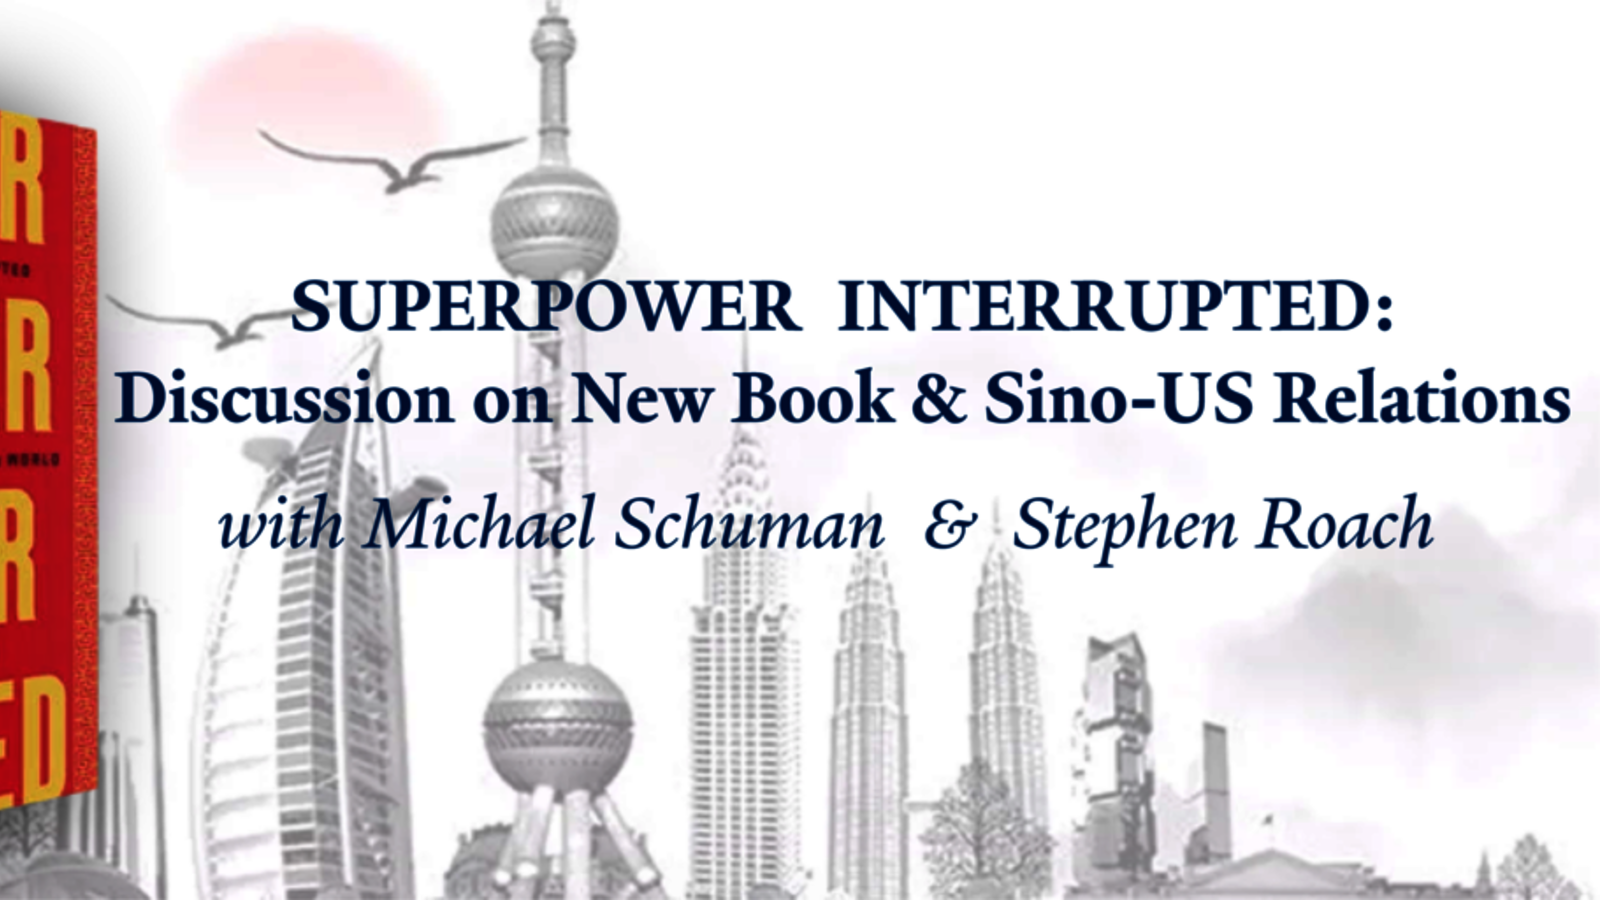 Graphic for webinar, "Superpower Interrupted: Discussion on New Book & Future of US-China Relations"